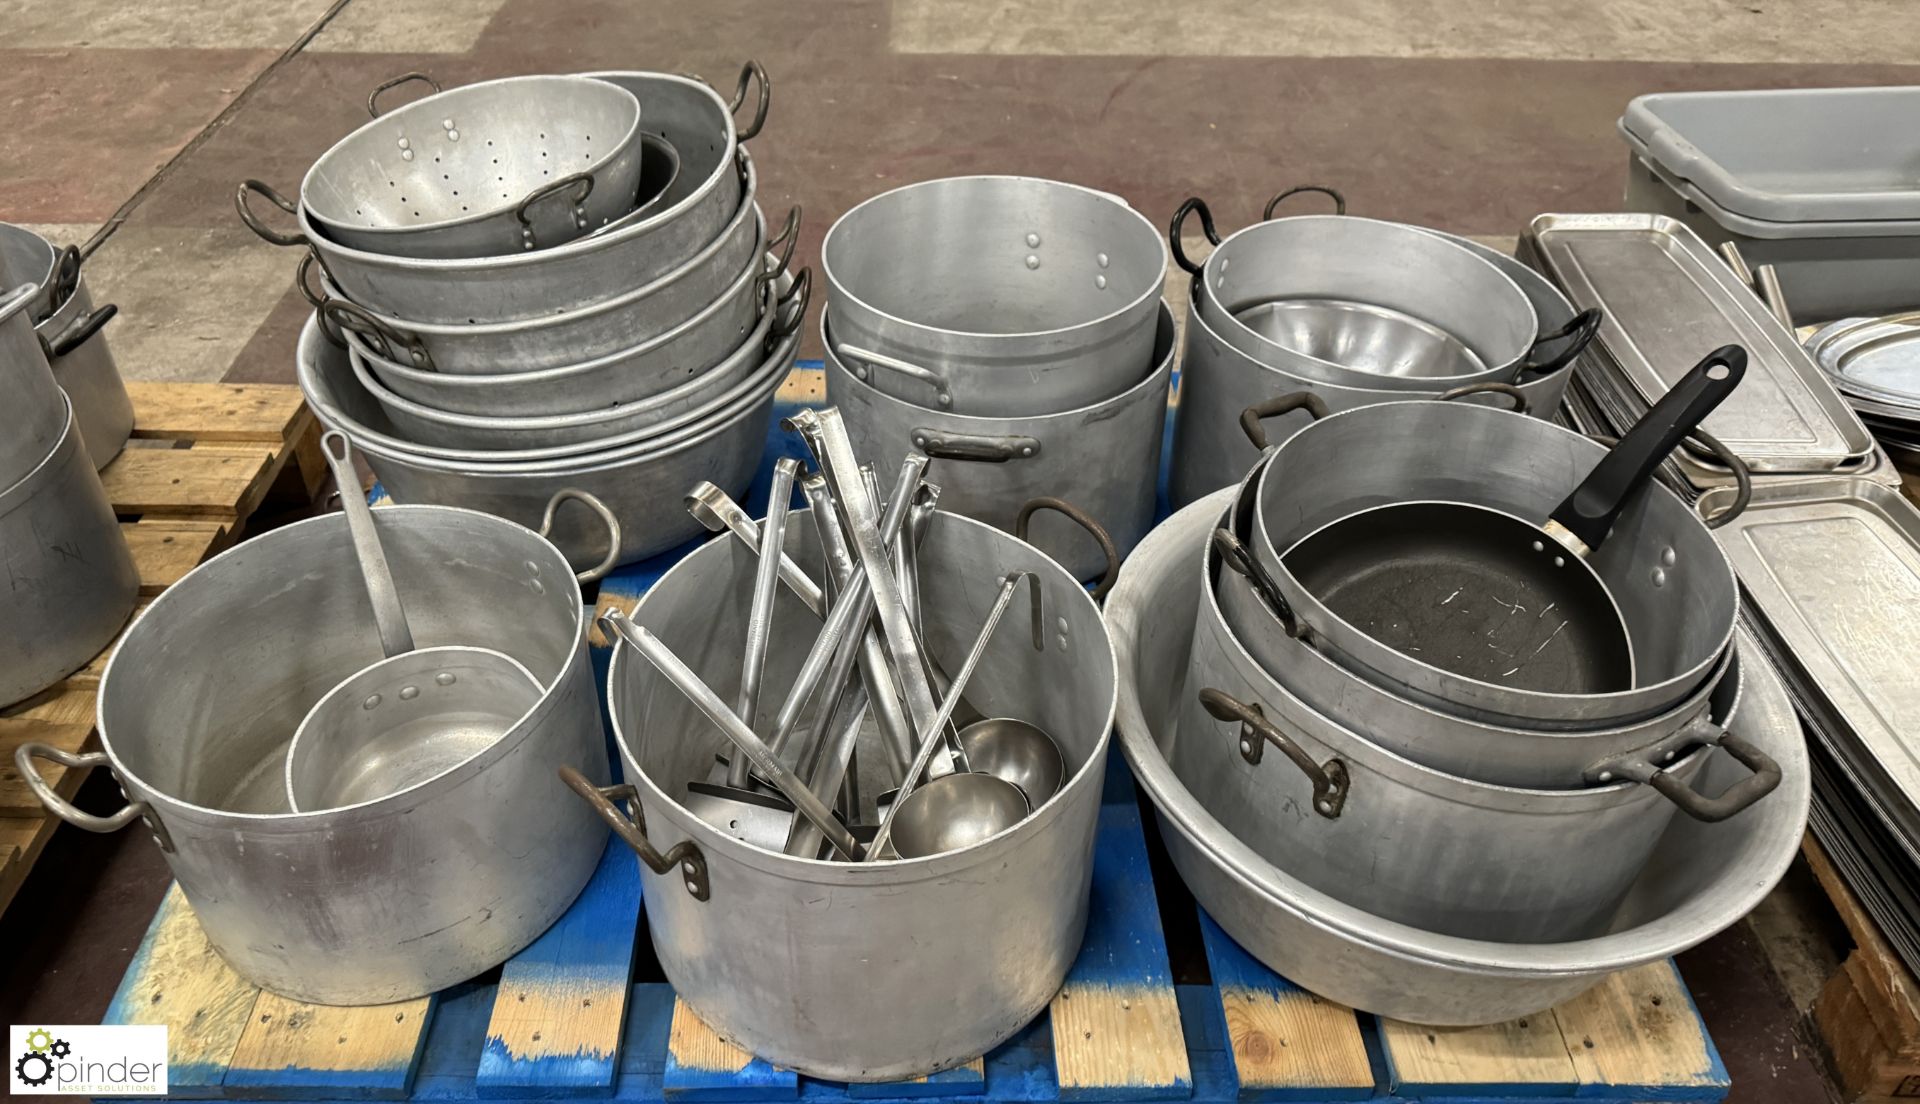 Quantity Cooking Pots, Bowls and Colanders, to pallet